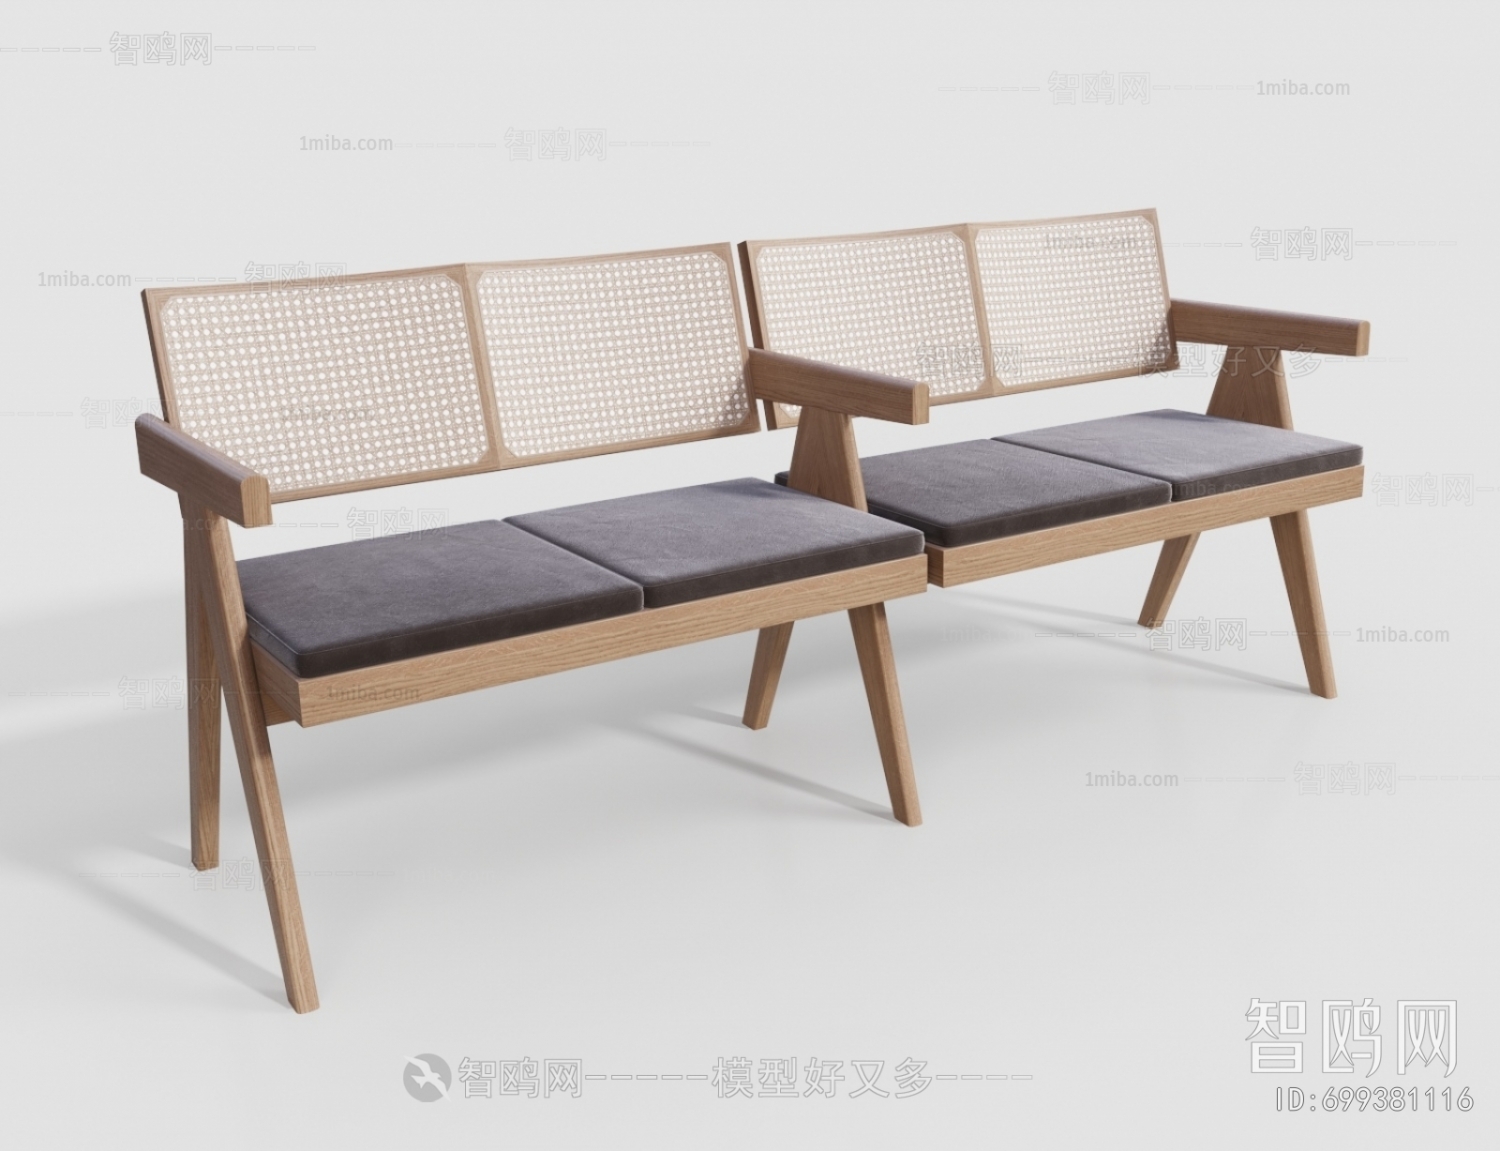 New Chinese Style Outdoor Chair